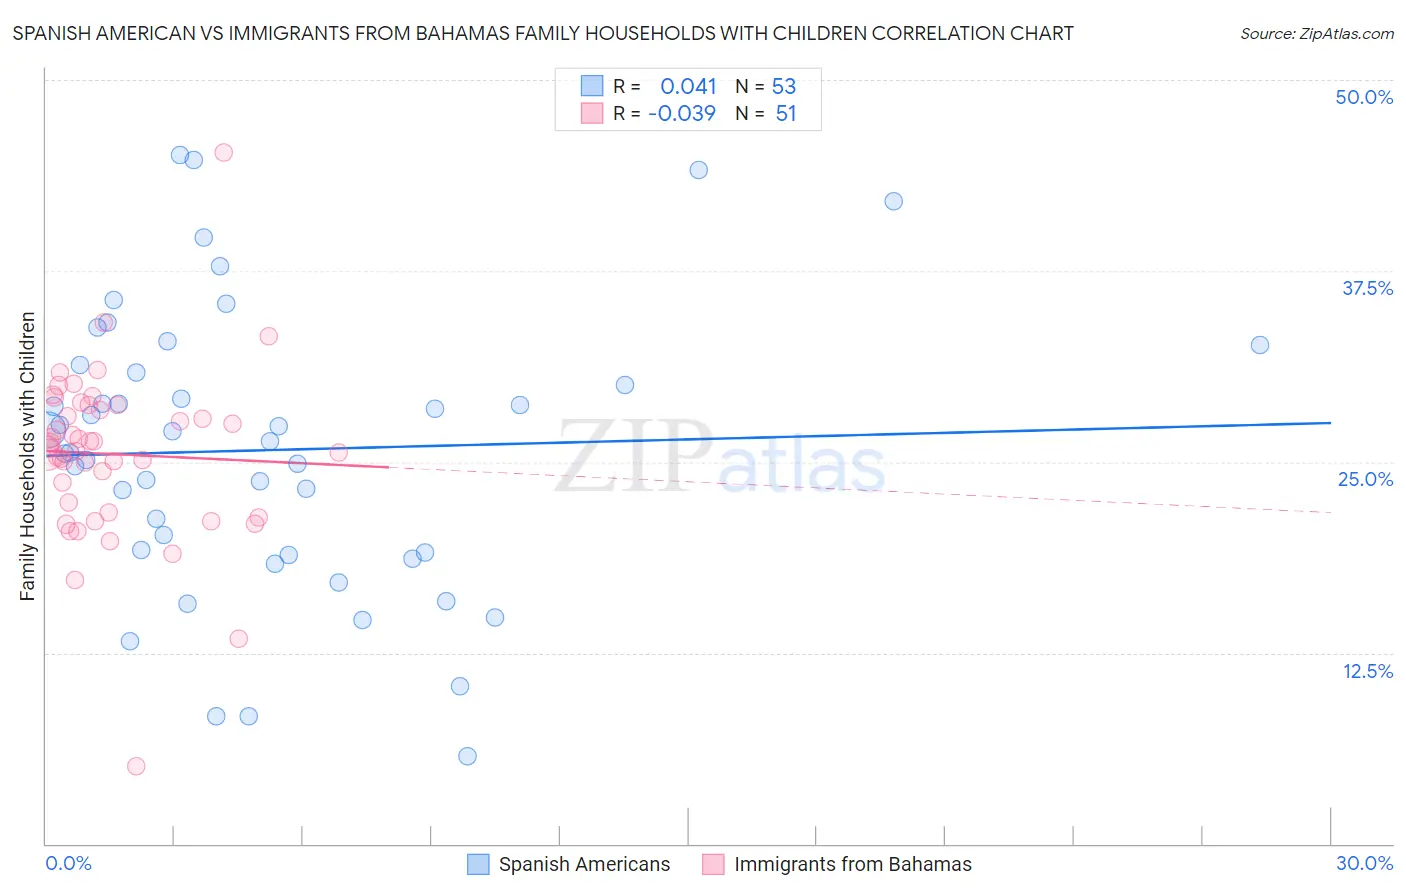 Spanish American vs Immigrants from Bahamas Family Households with Children